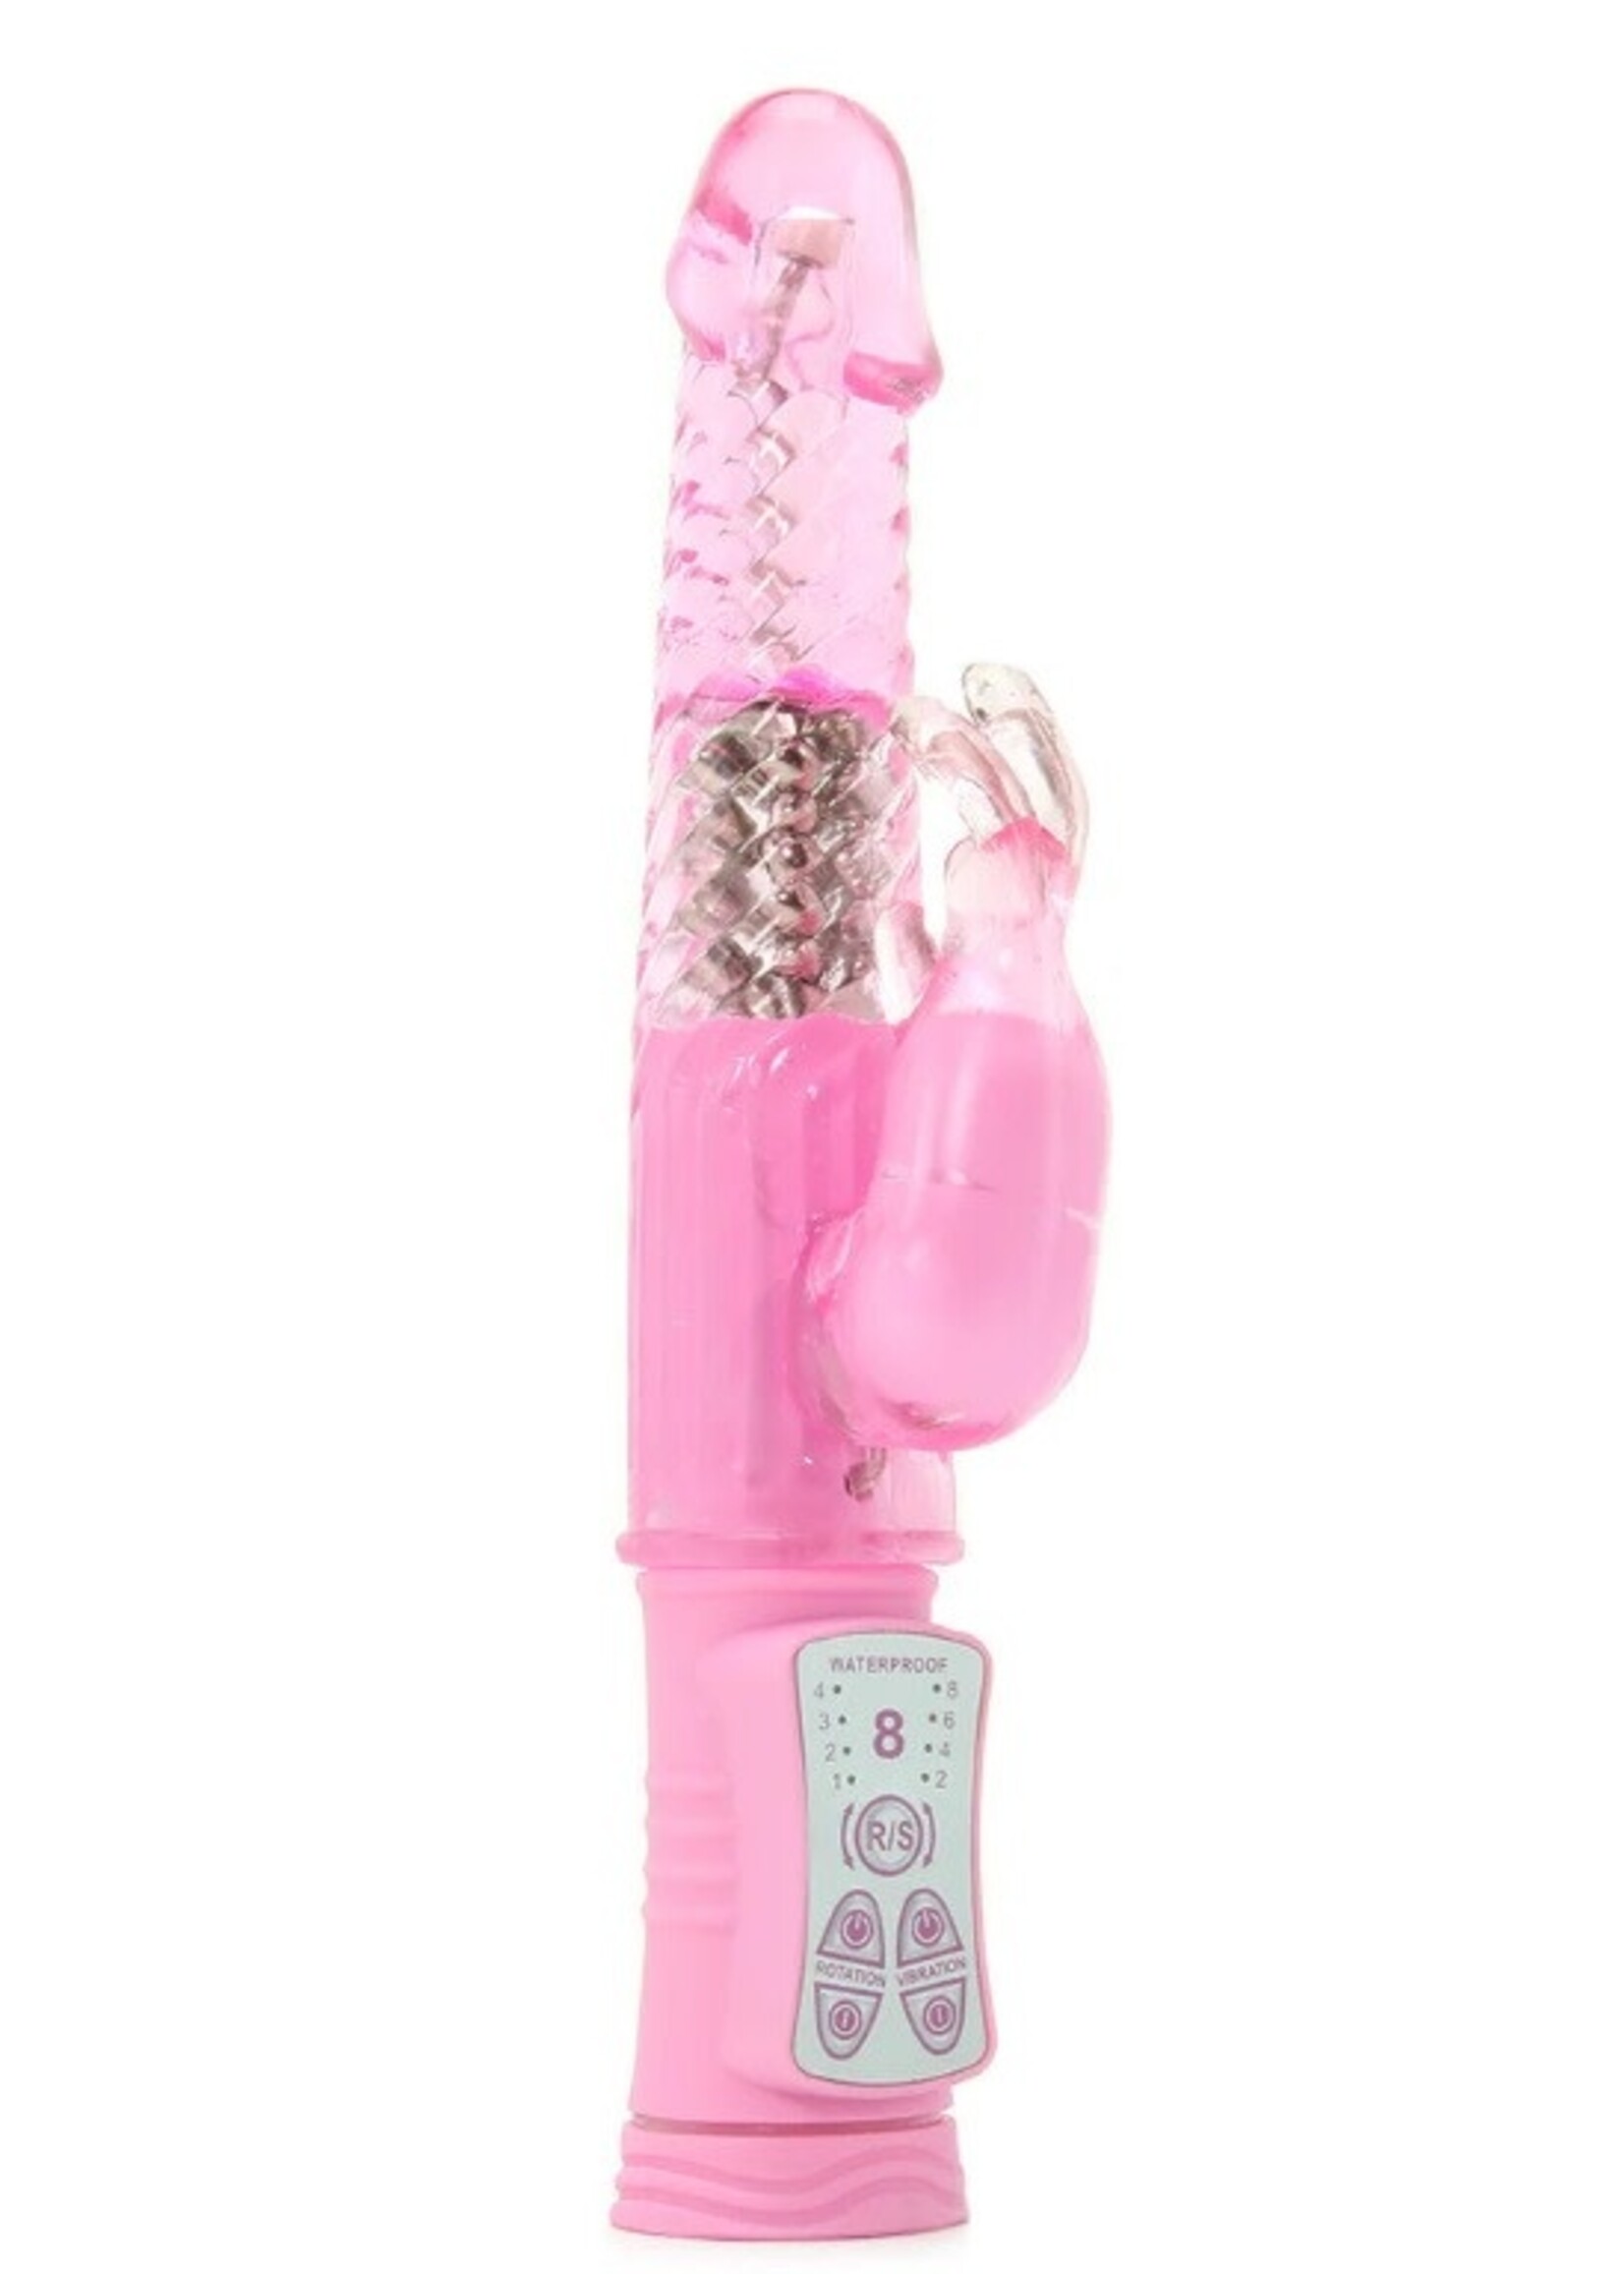 Eve's First Rabbit Vibrator in Pink